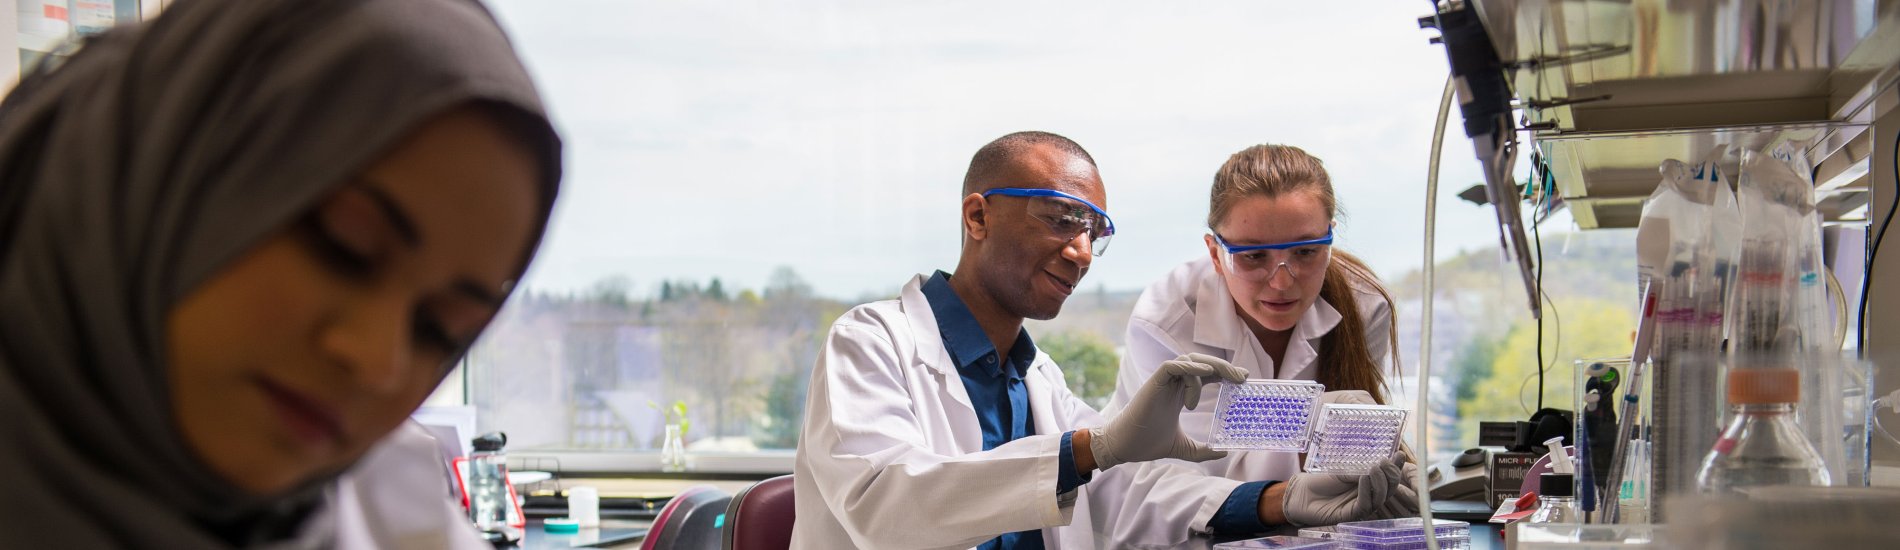 Two researchers in white lab coats and protective glasses examine a specimen in the background, while a third researcher writes in a notebook in the foreground.